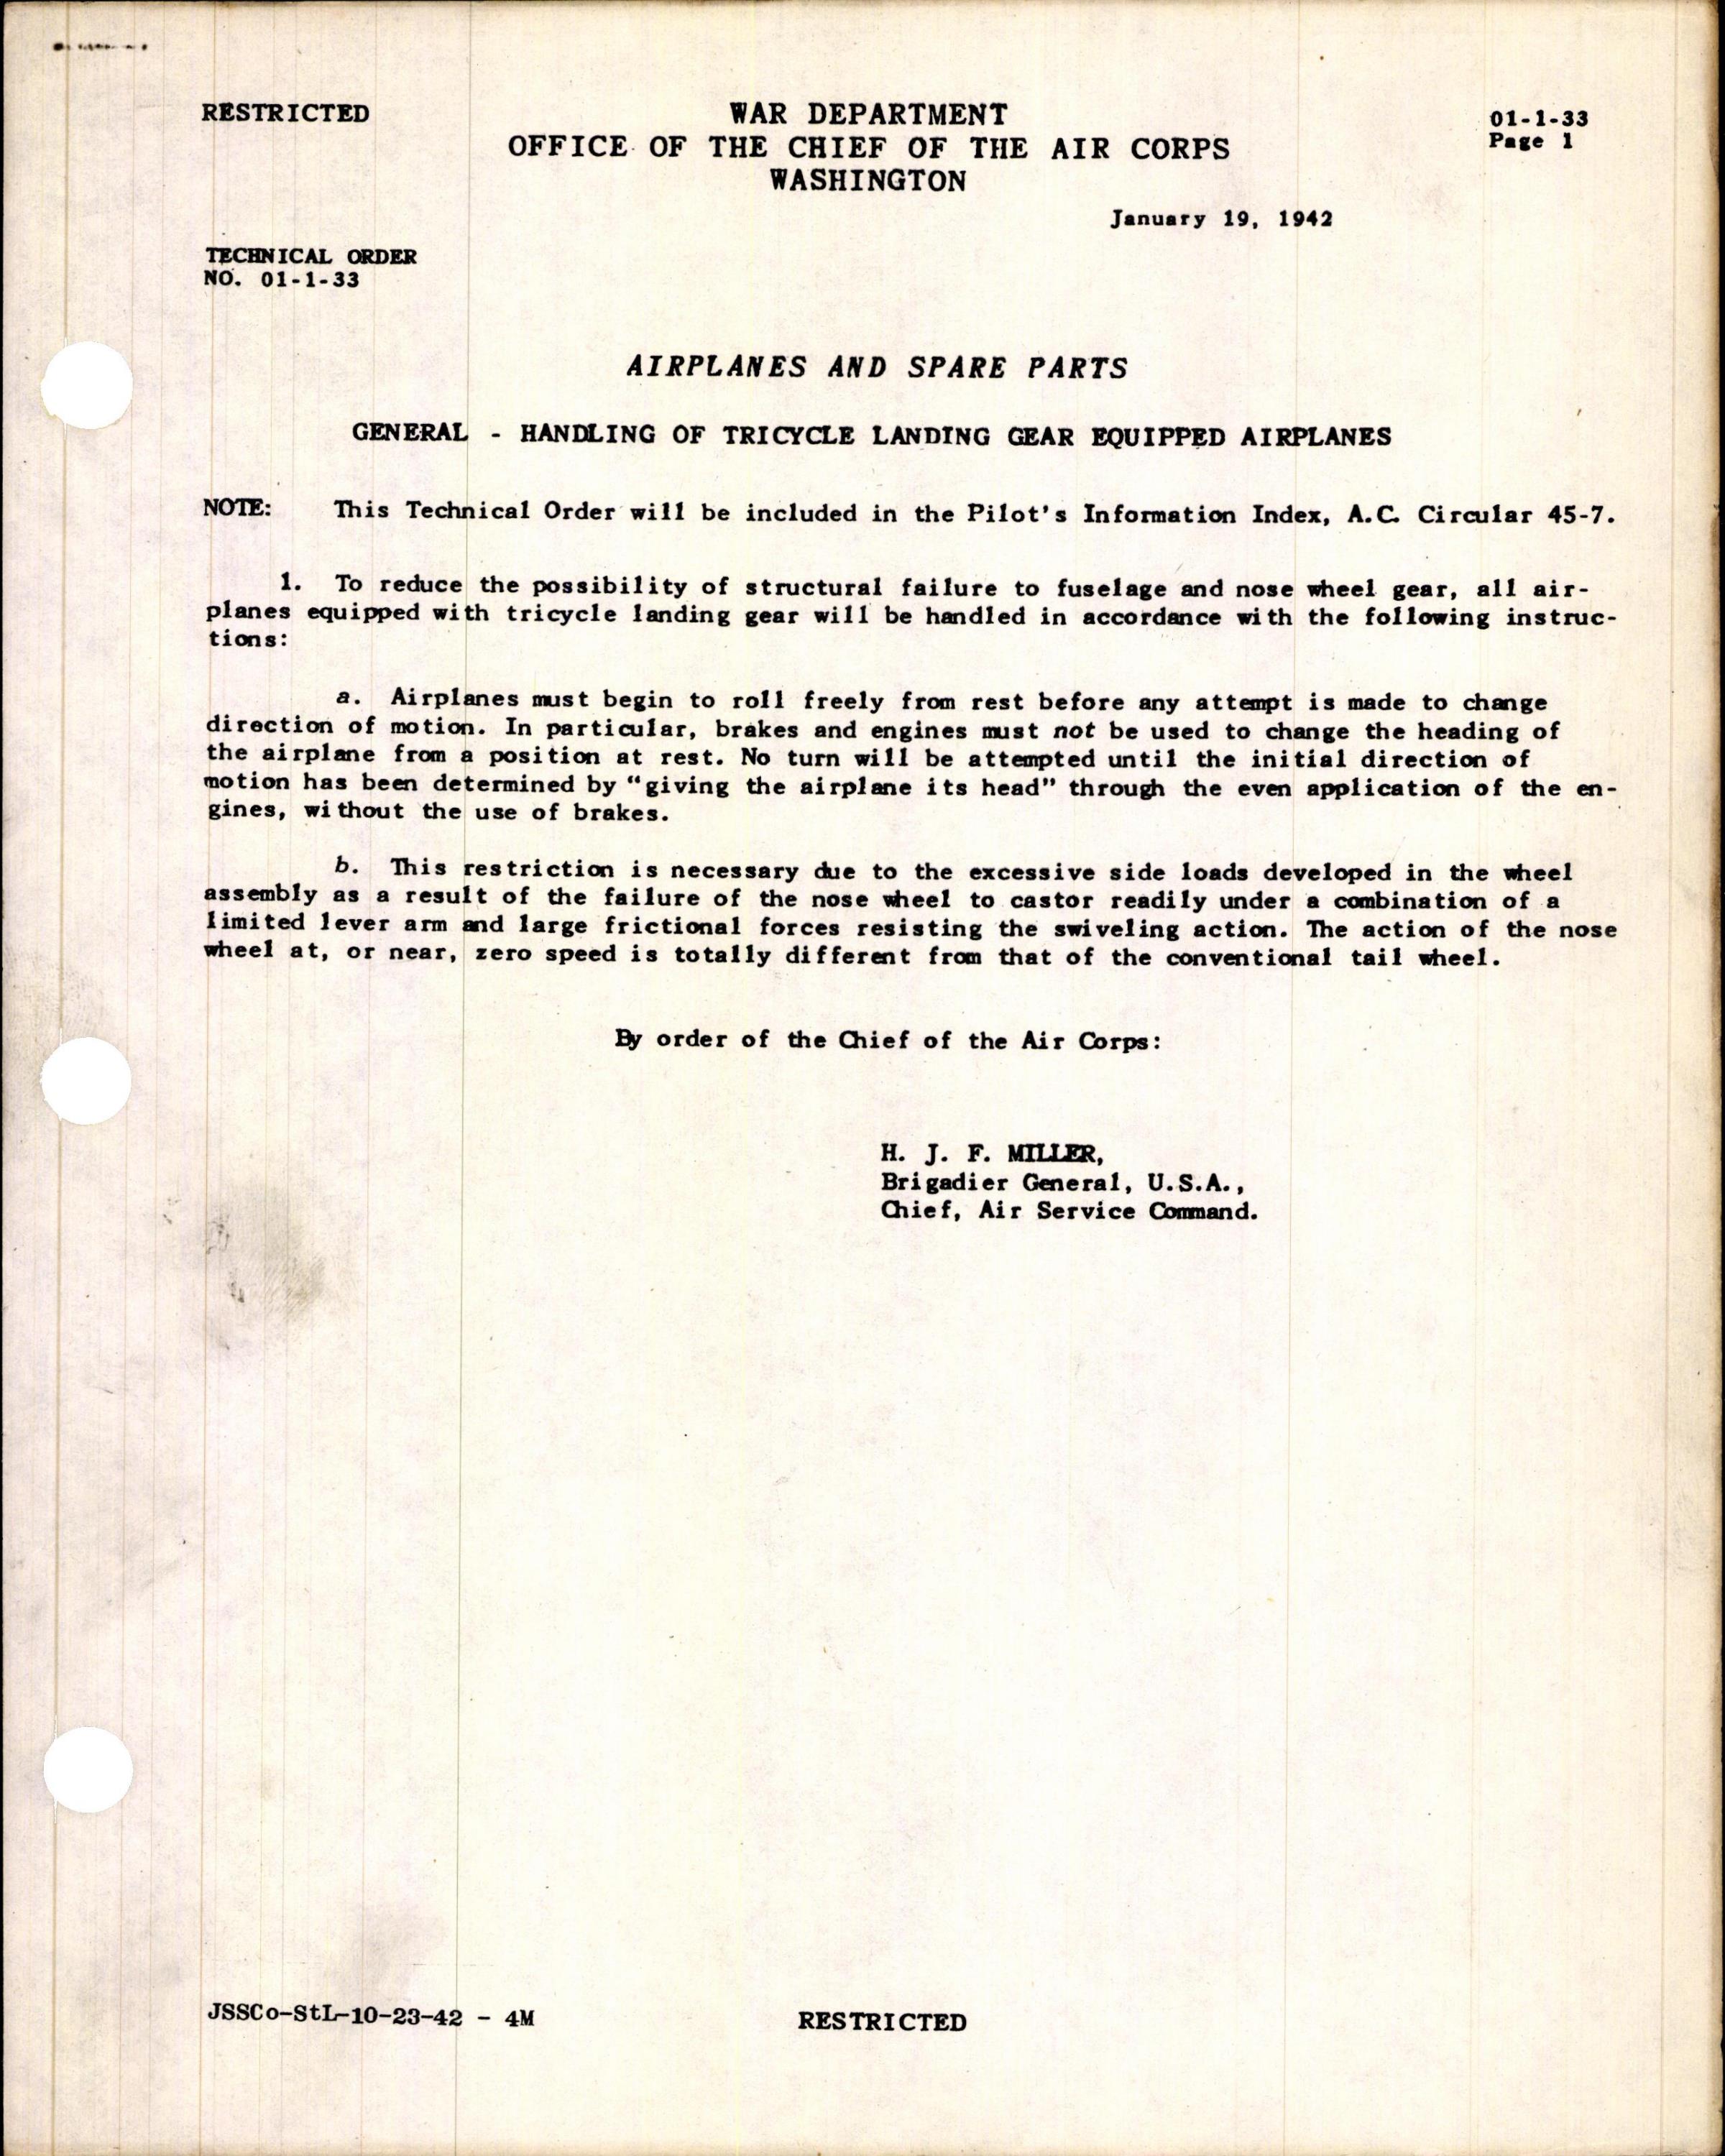 Sample page 1 from AirCorps Library document: Handling of Tricycle Gear Equipped Airplanes